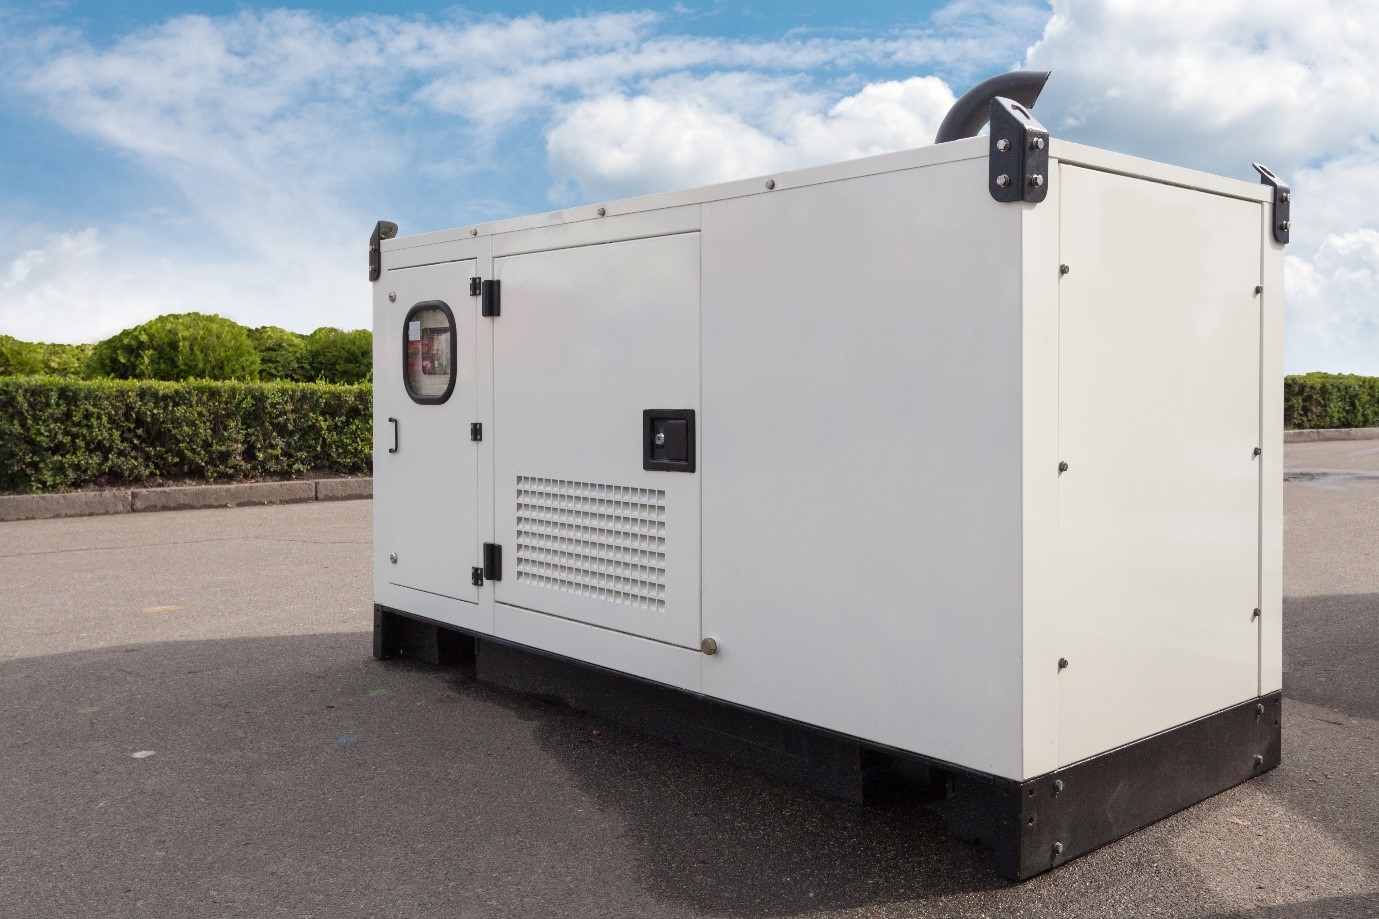 Repairing and maintaining tips for your generator